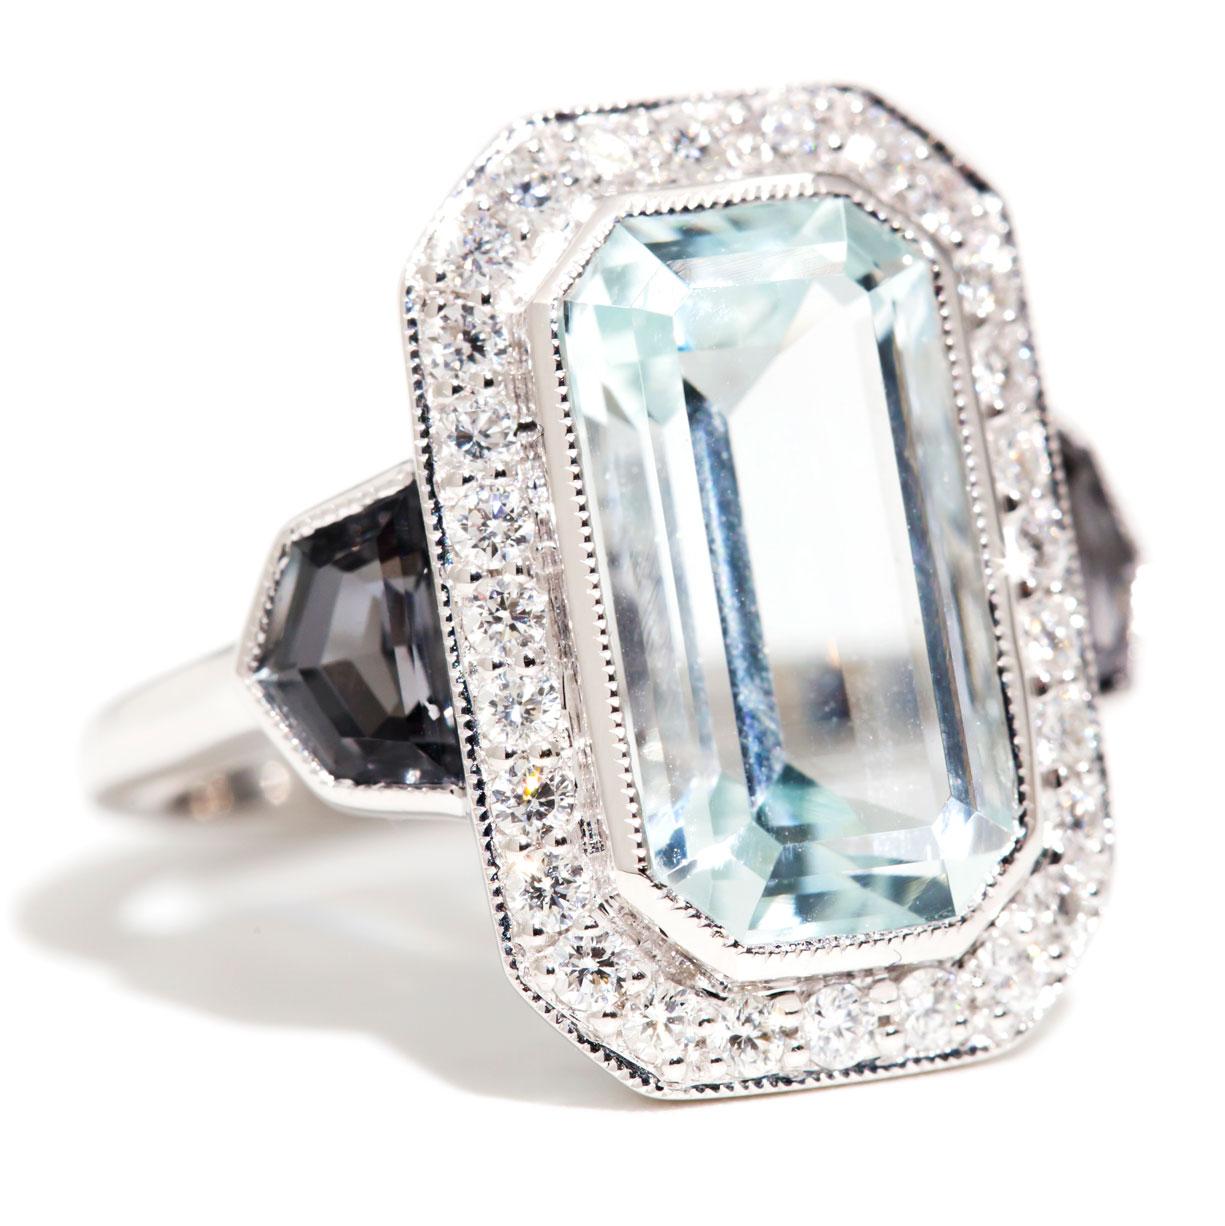 This wondrous art deco inspired ring is forged in 18 carat white gold and features a  flawless, bright light blue 5.10 carat emerald cut Aquamarine. The captivating Aquamarine is encompassed by a border of sparkling round brilliant cut diamonds, and